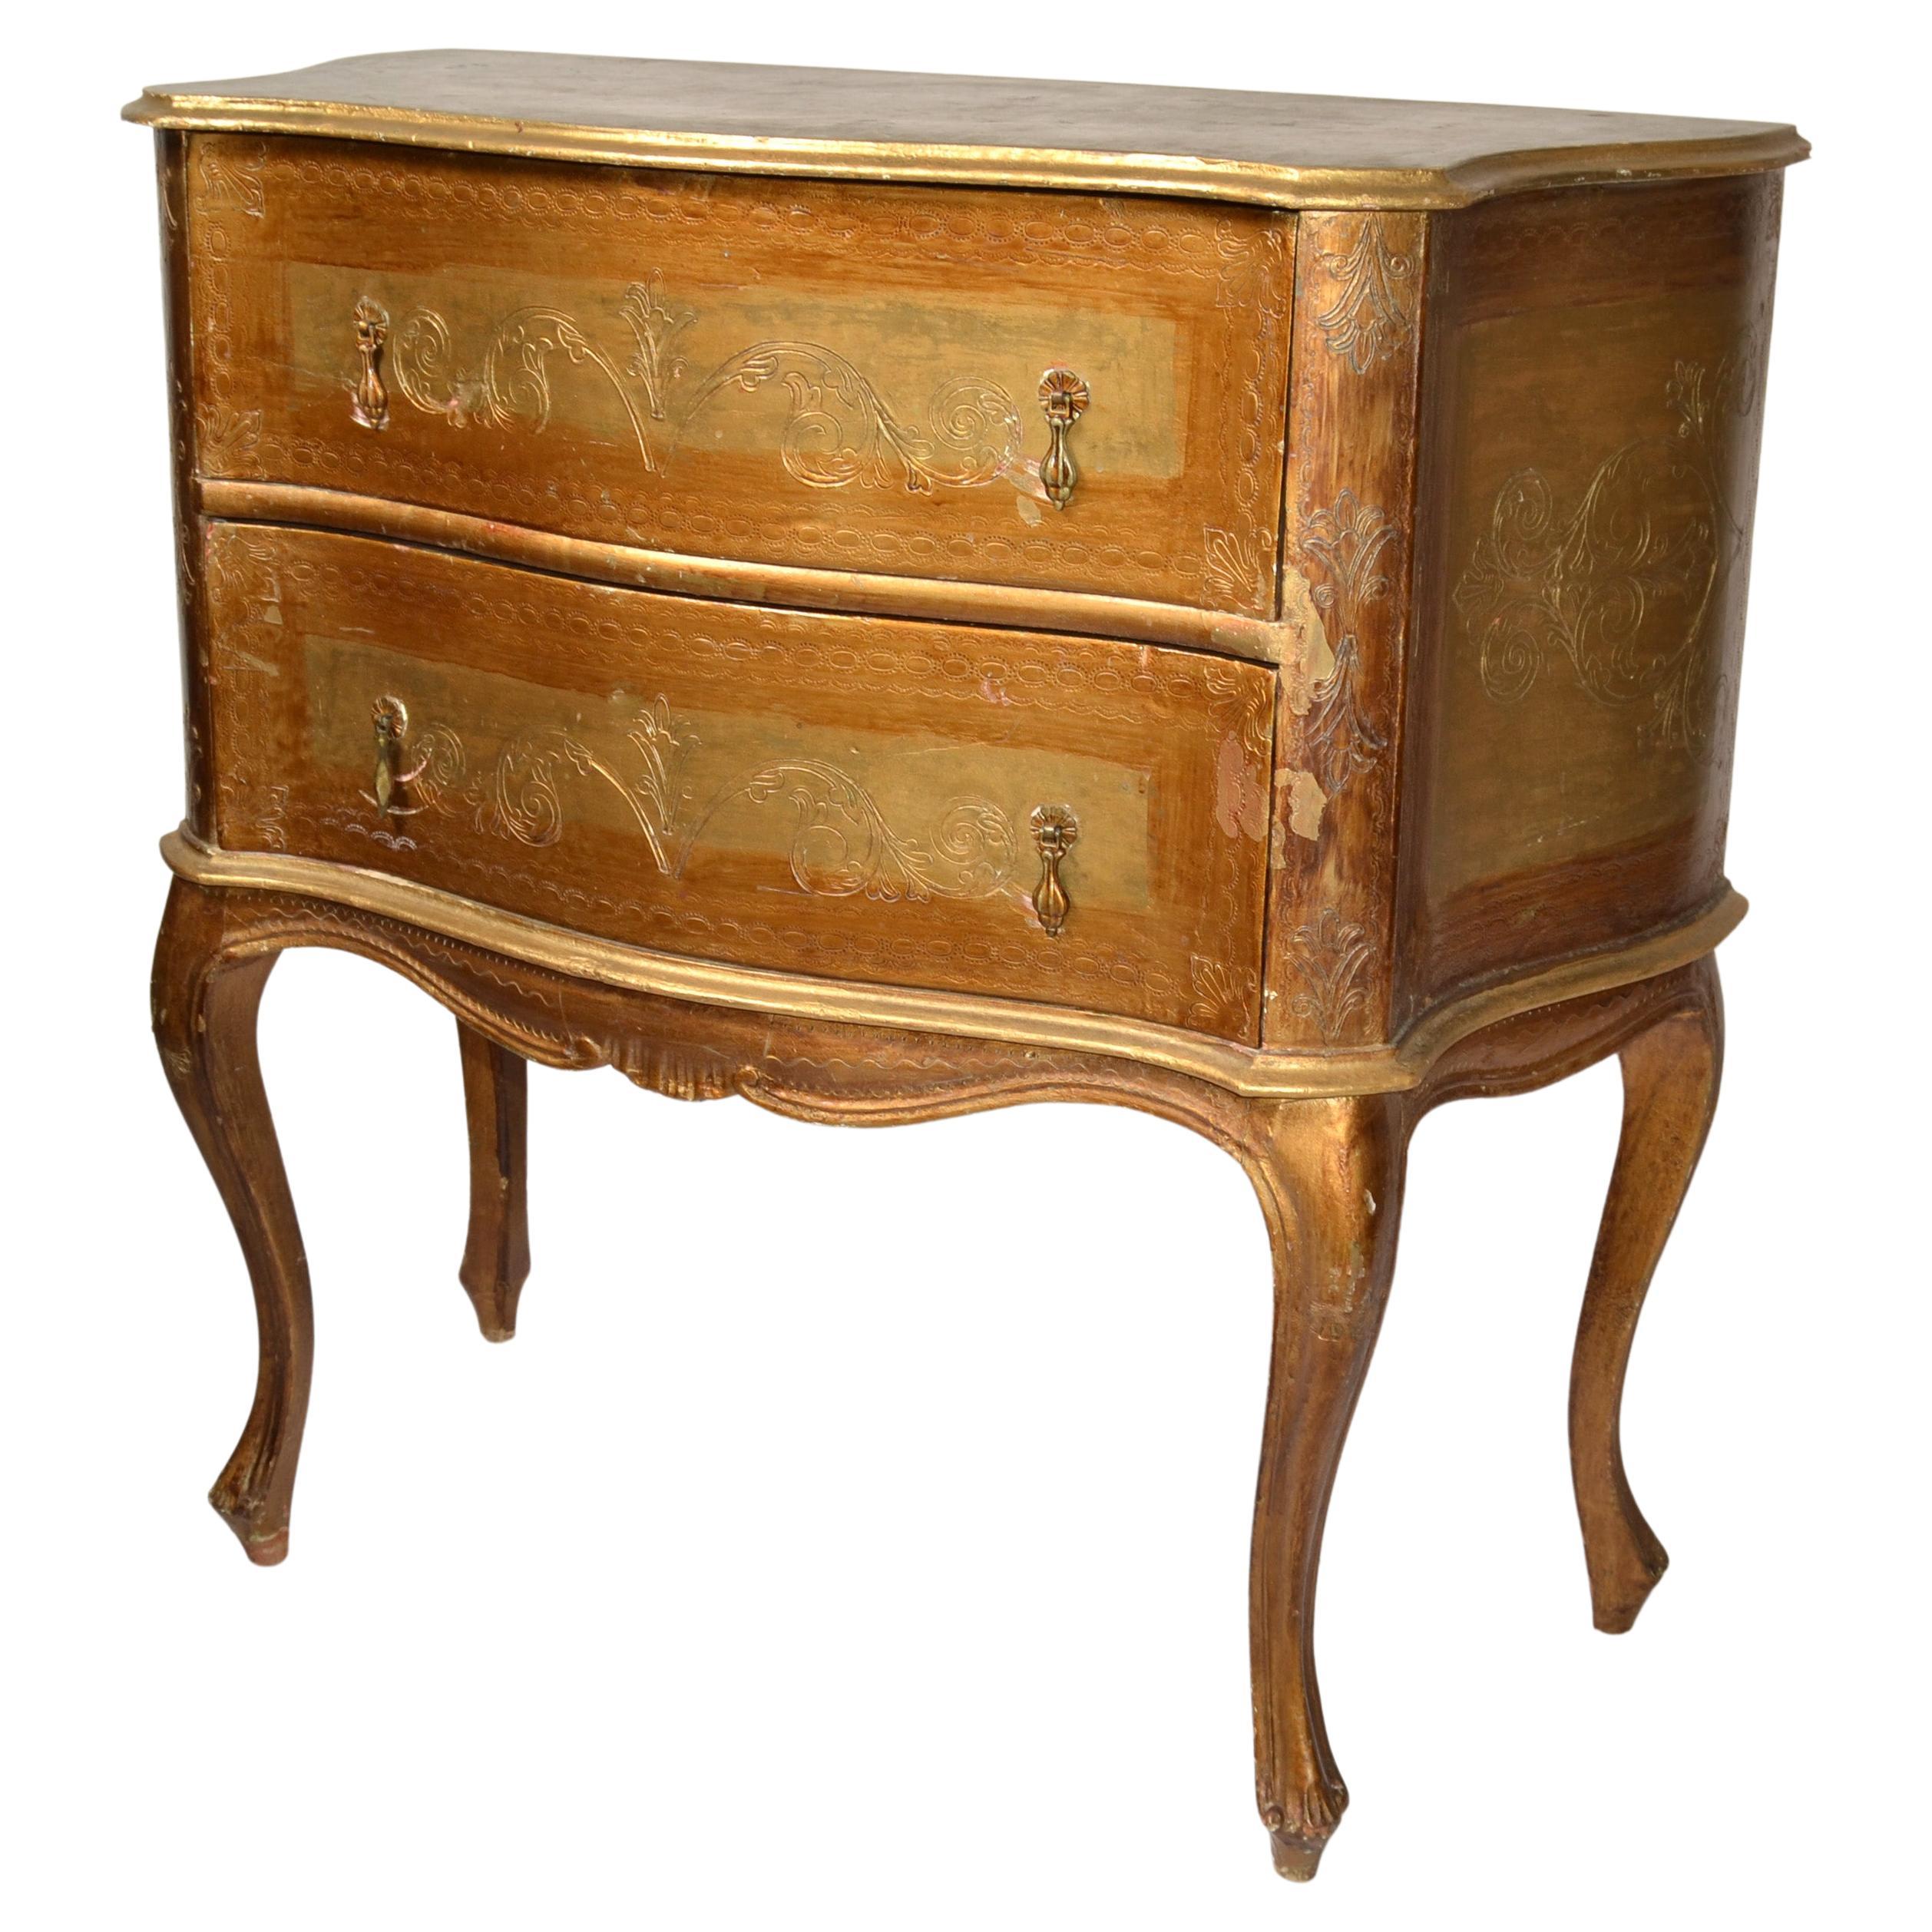 This most elegant and charming Italian 20th century Florentine giltwood chest of drawers, commode or cabinet. 
Features hand carved and etched palmette design to the front and both sides, comes with 2 drawers and they have brass pulls. 
Everything